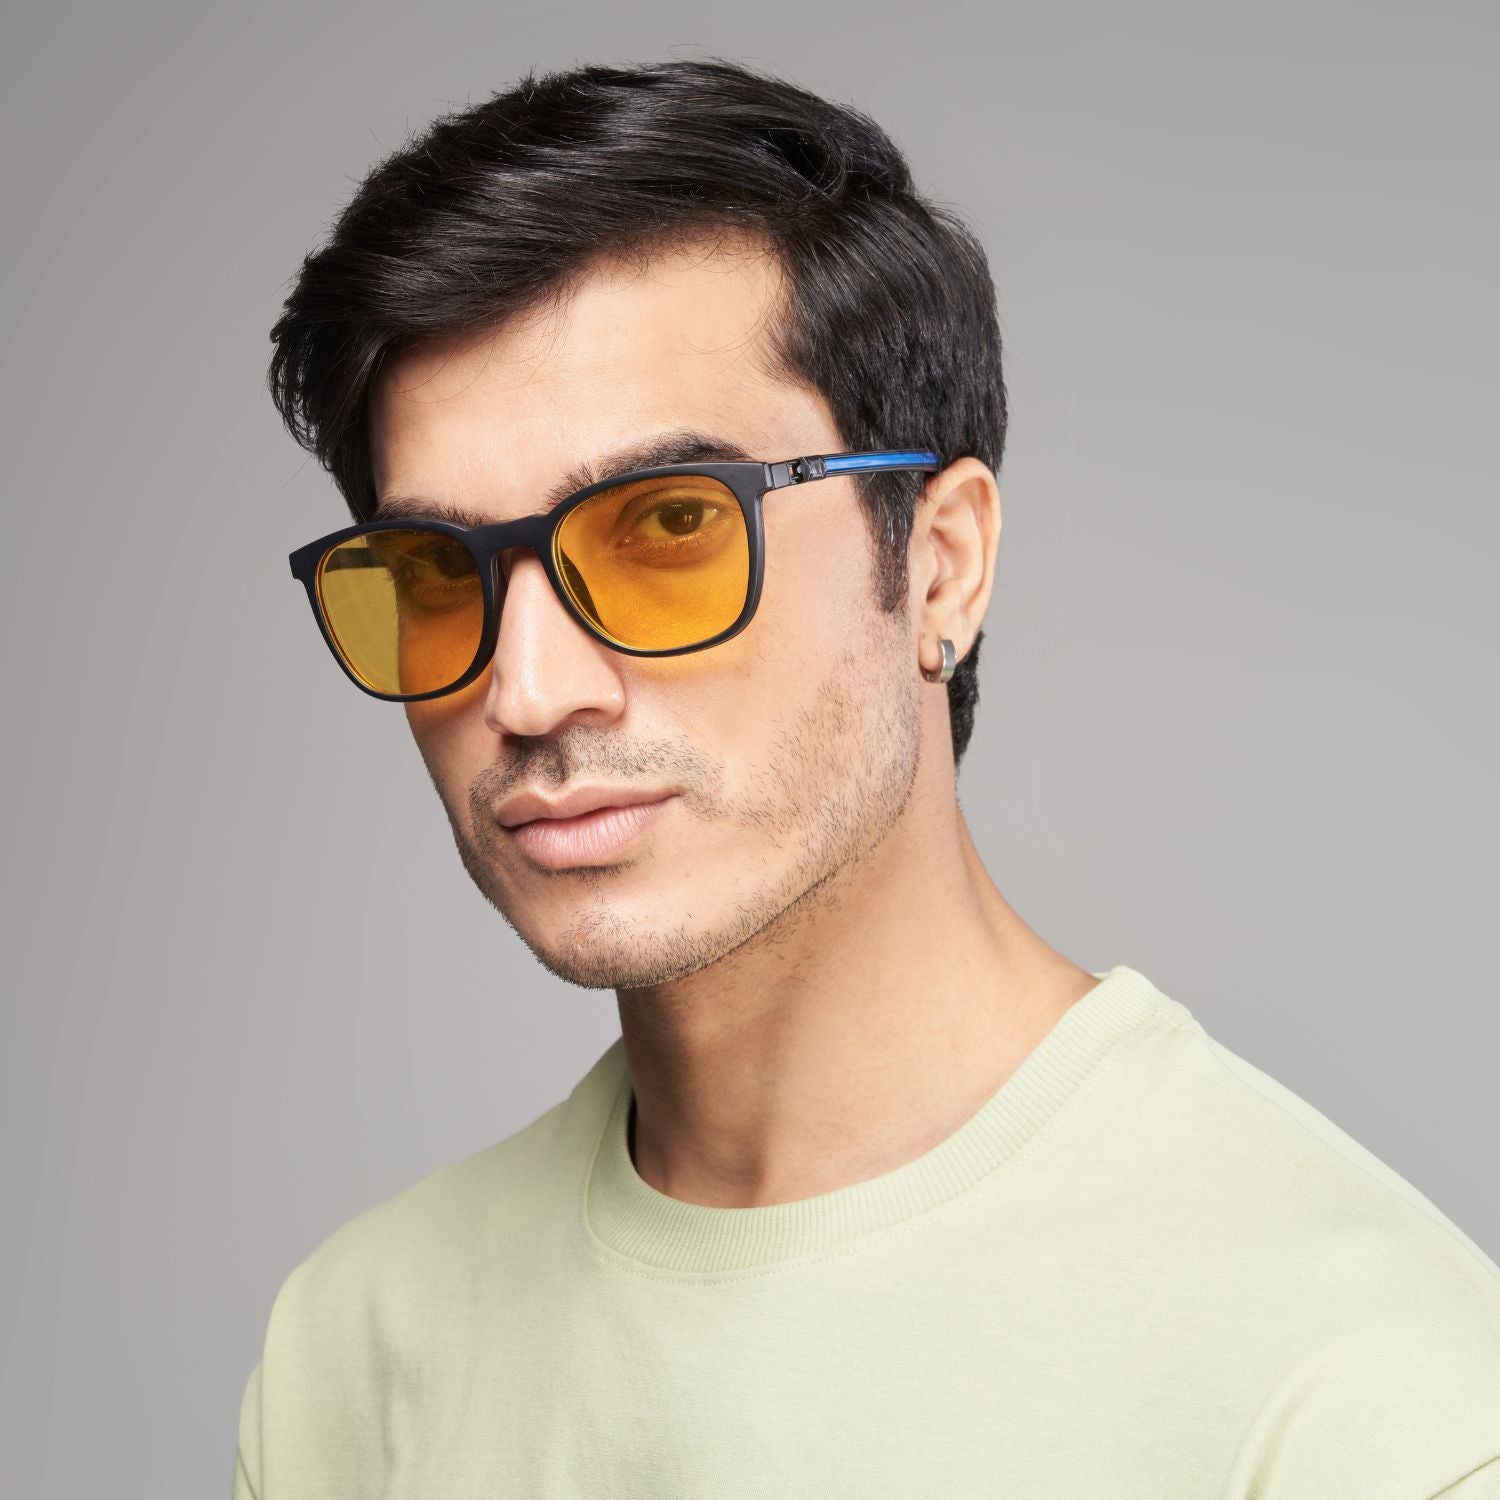 Day-Night Changeable Lens Wayfarer Sunglasses For Men And Women, with dark yellow clip on.